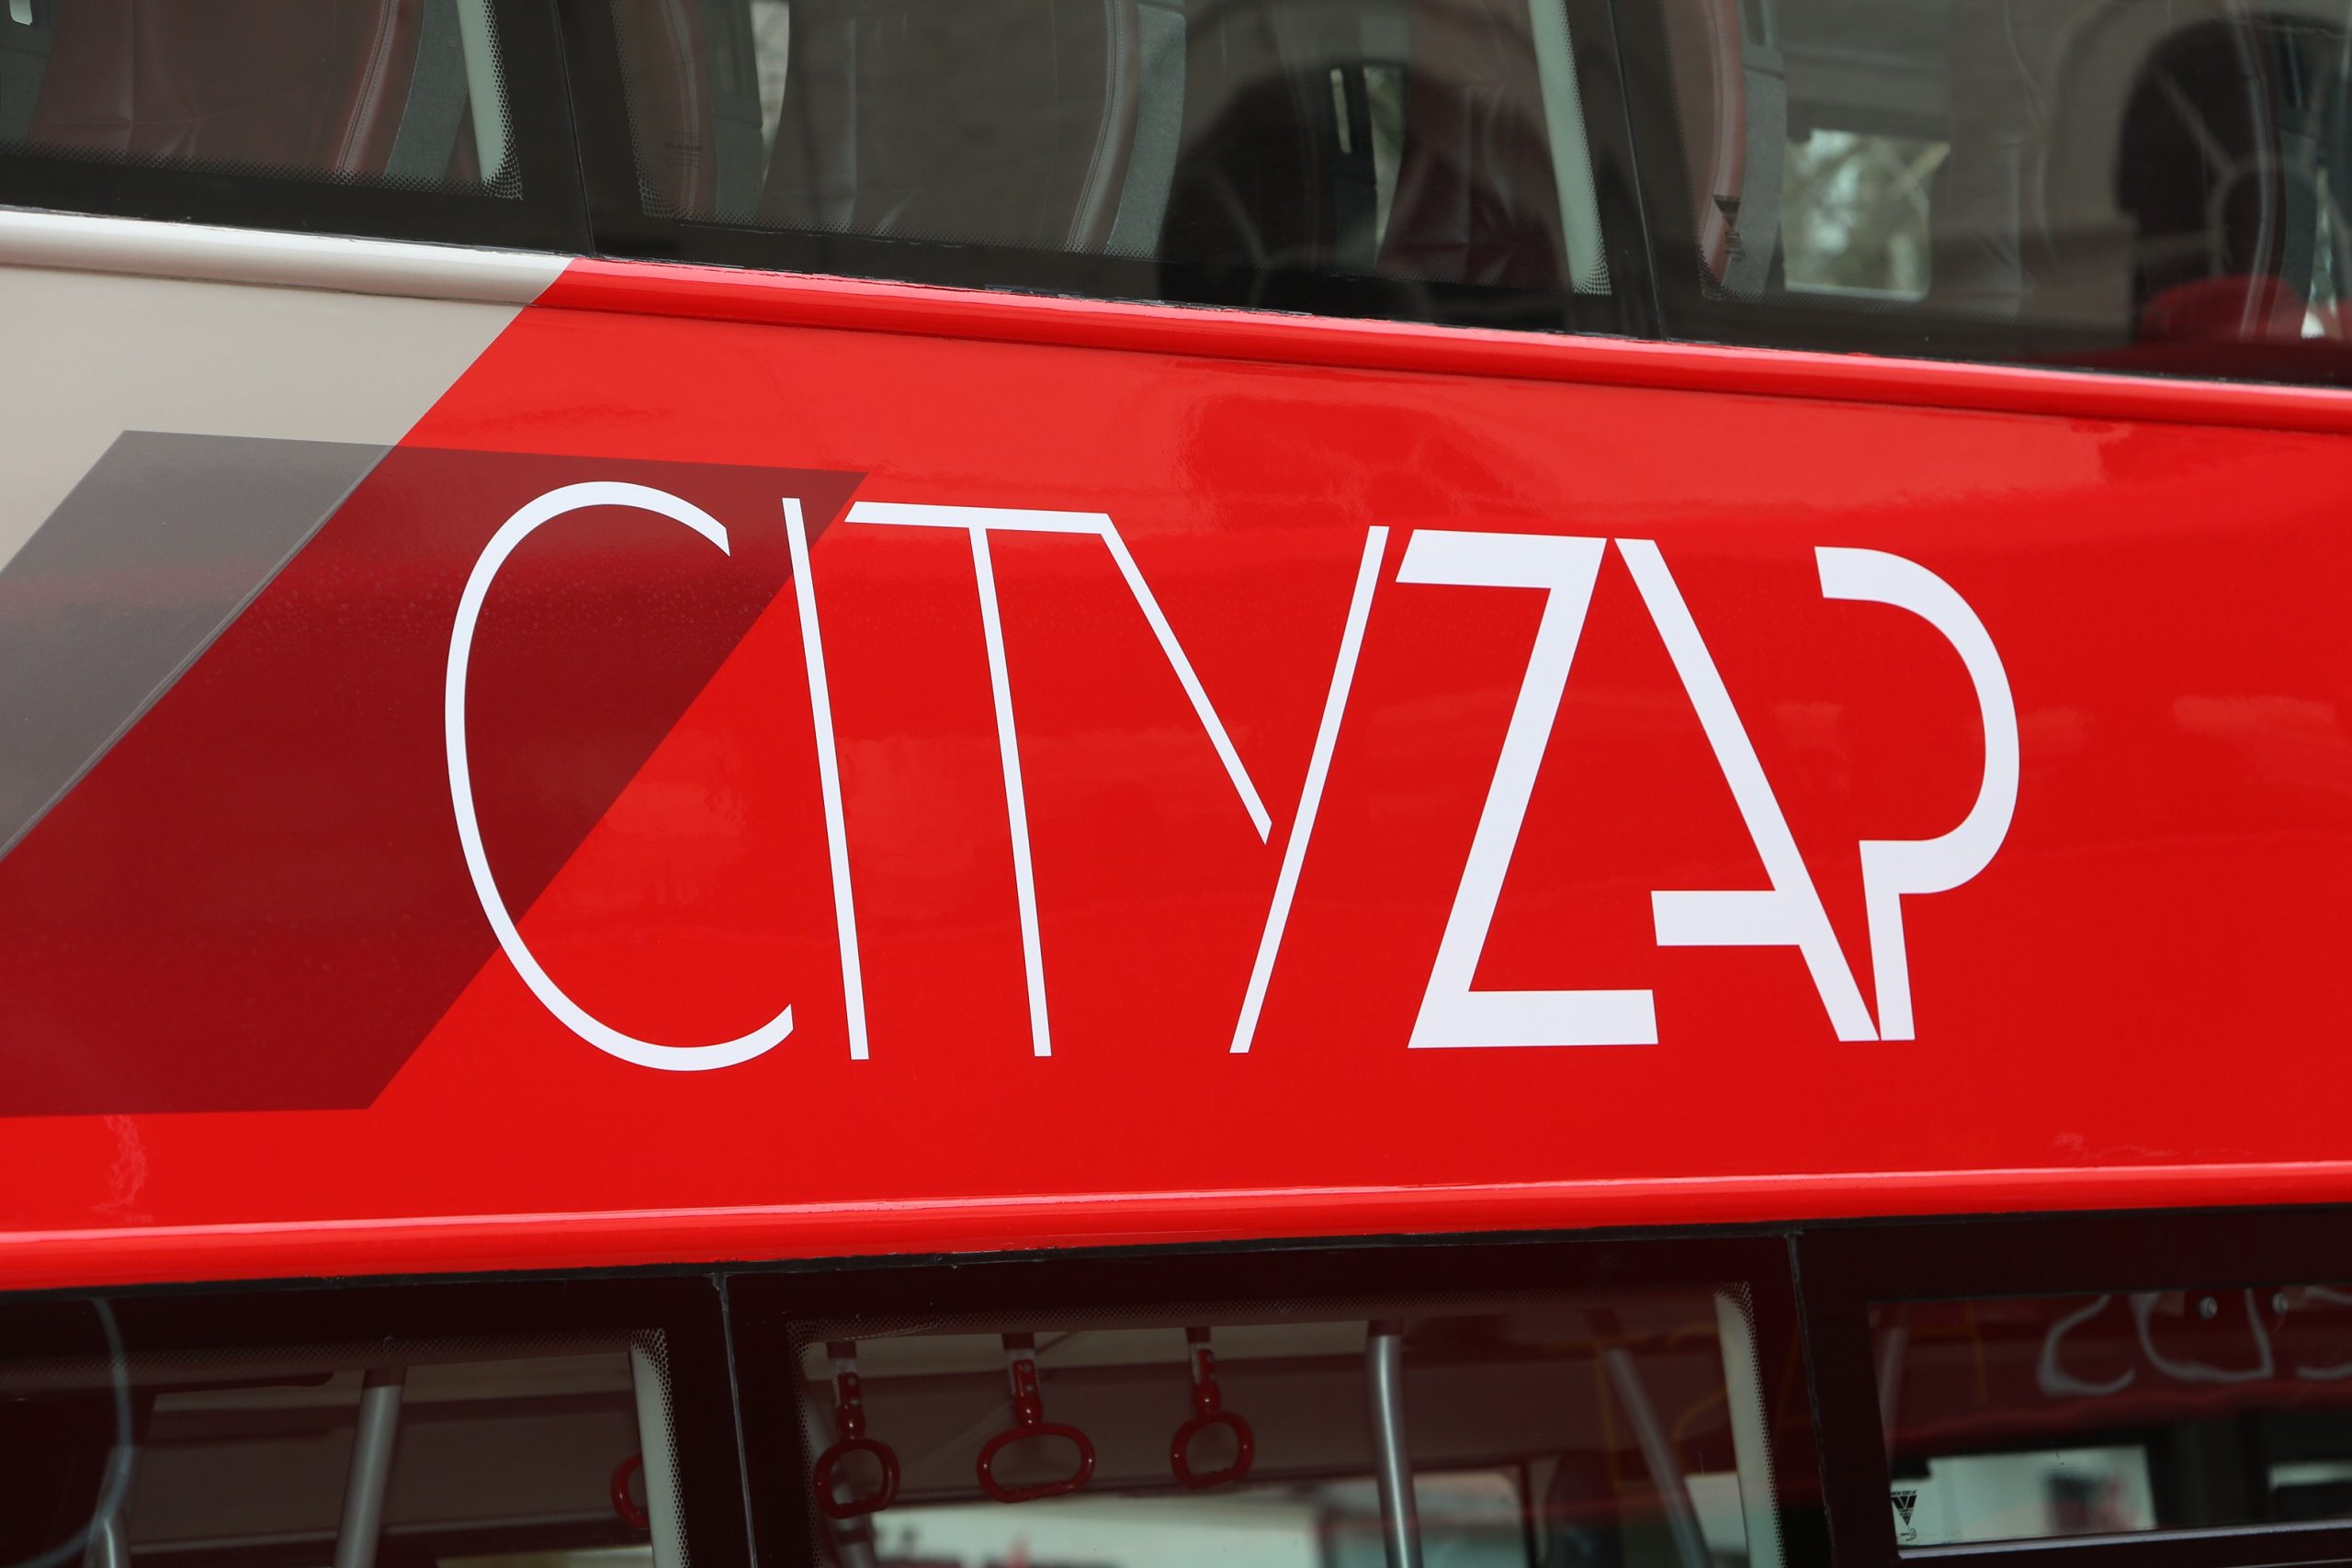 Cityzap service between Leeds and York to be withdrawn by Transdev Blazefield